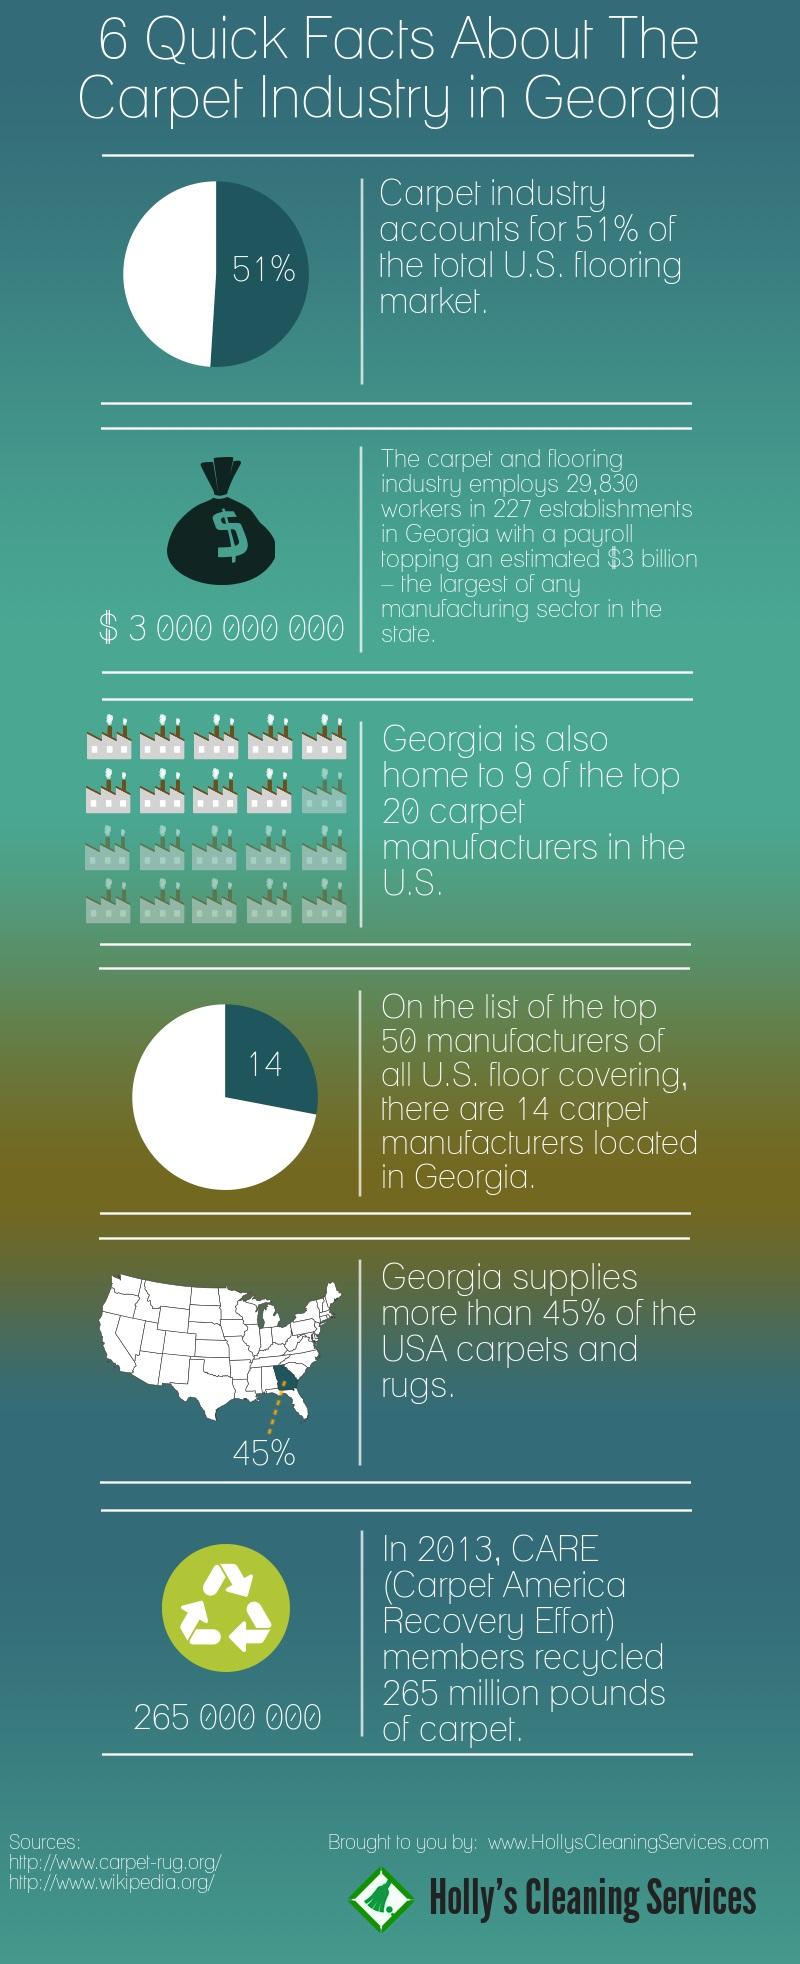 6 Qucik Facts About The Carpet Industry in Georgia